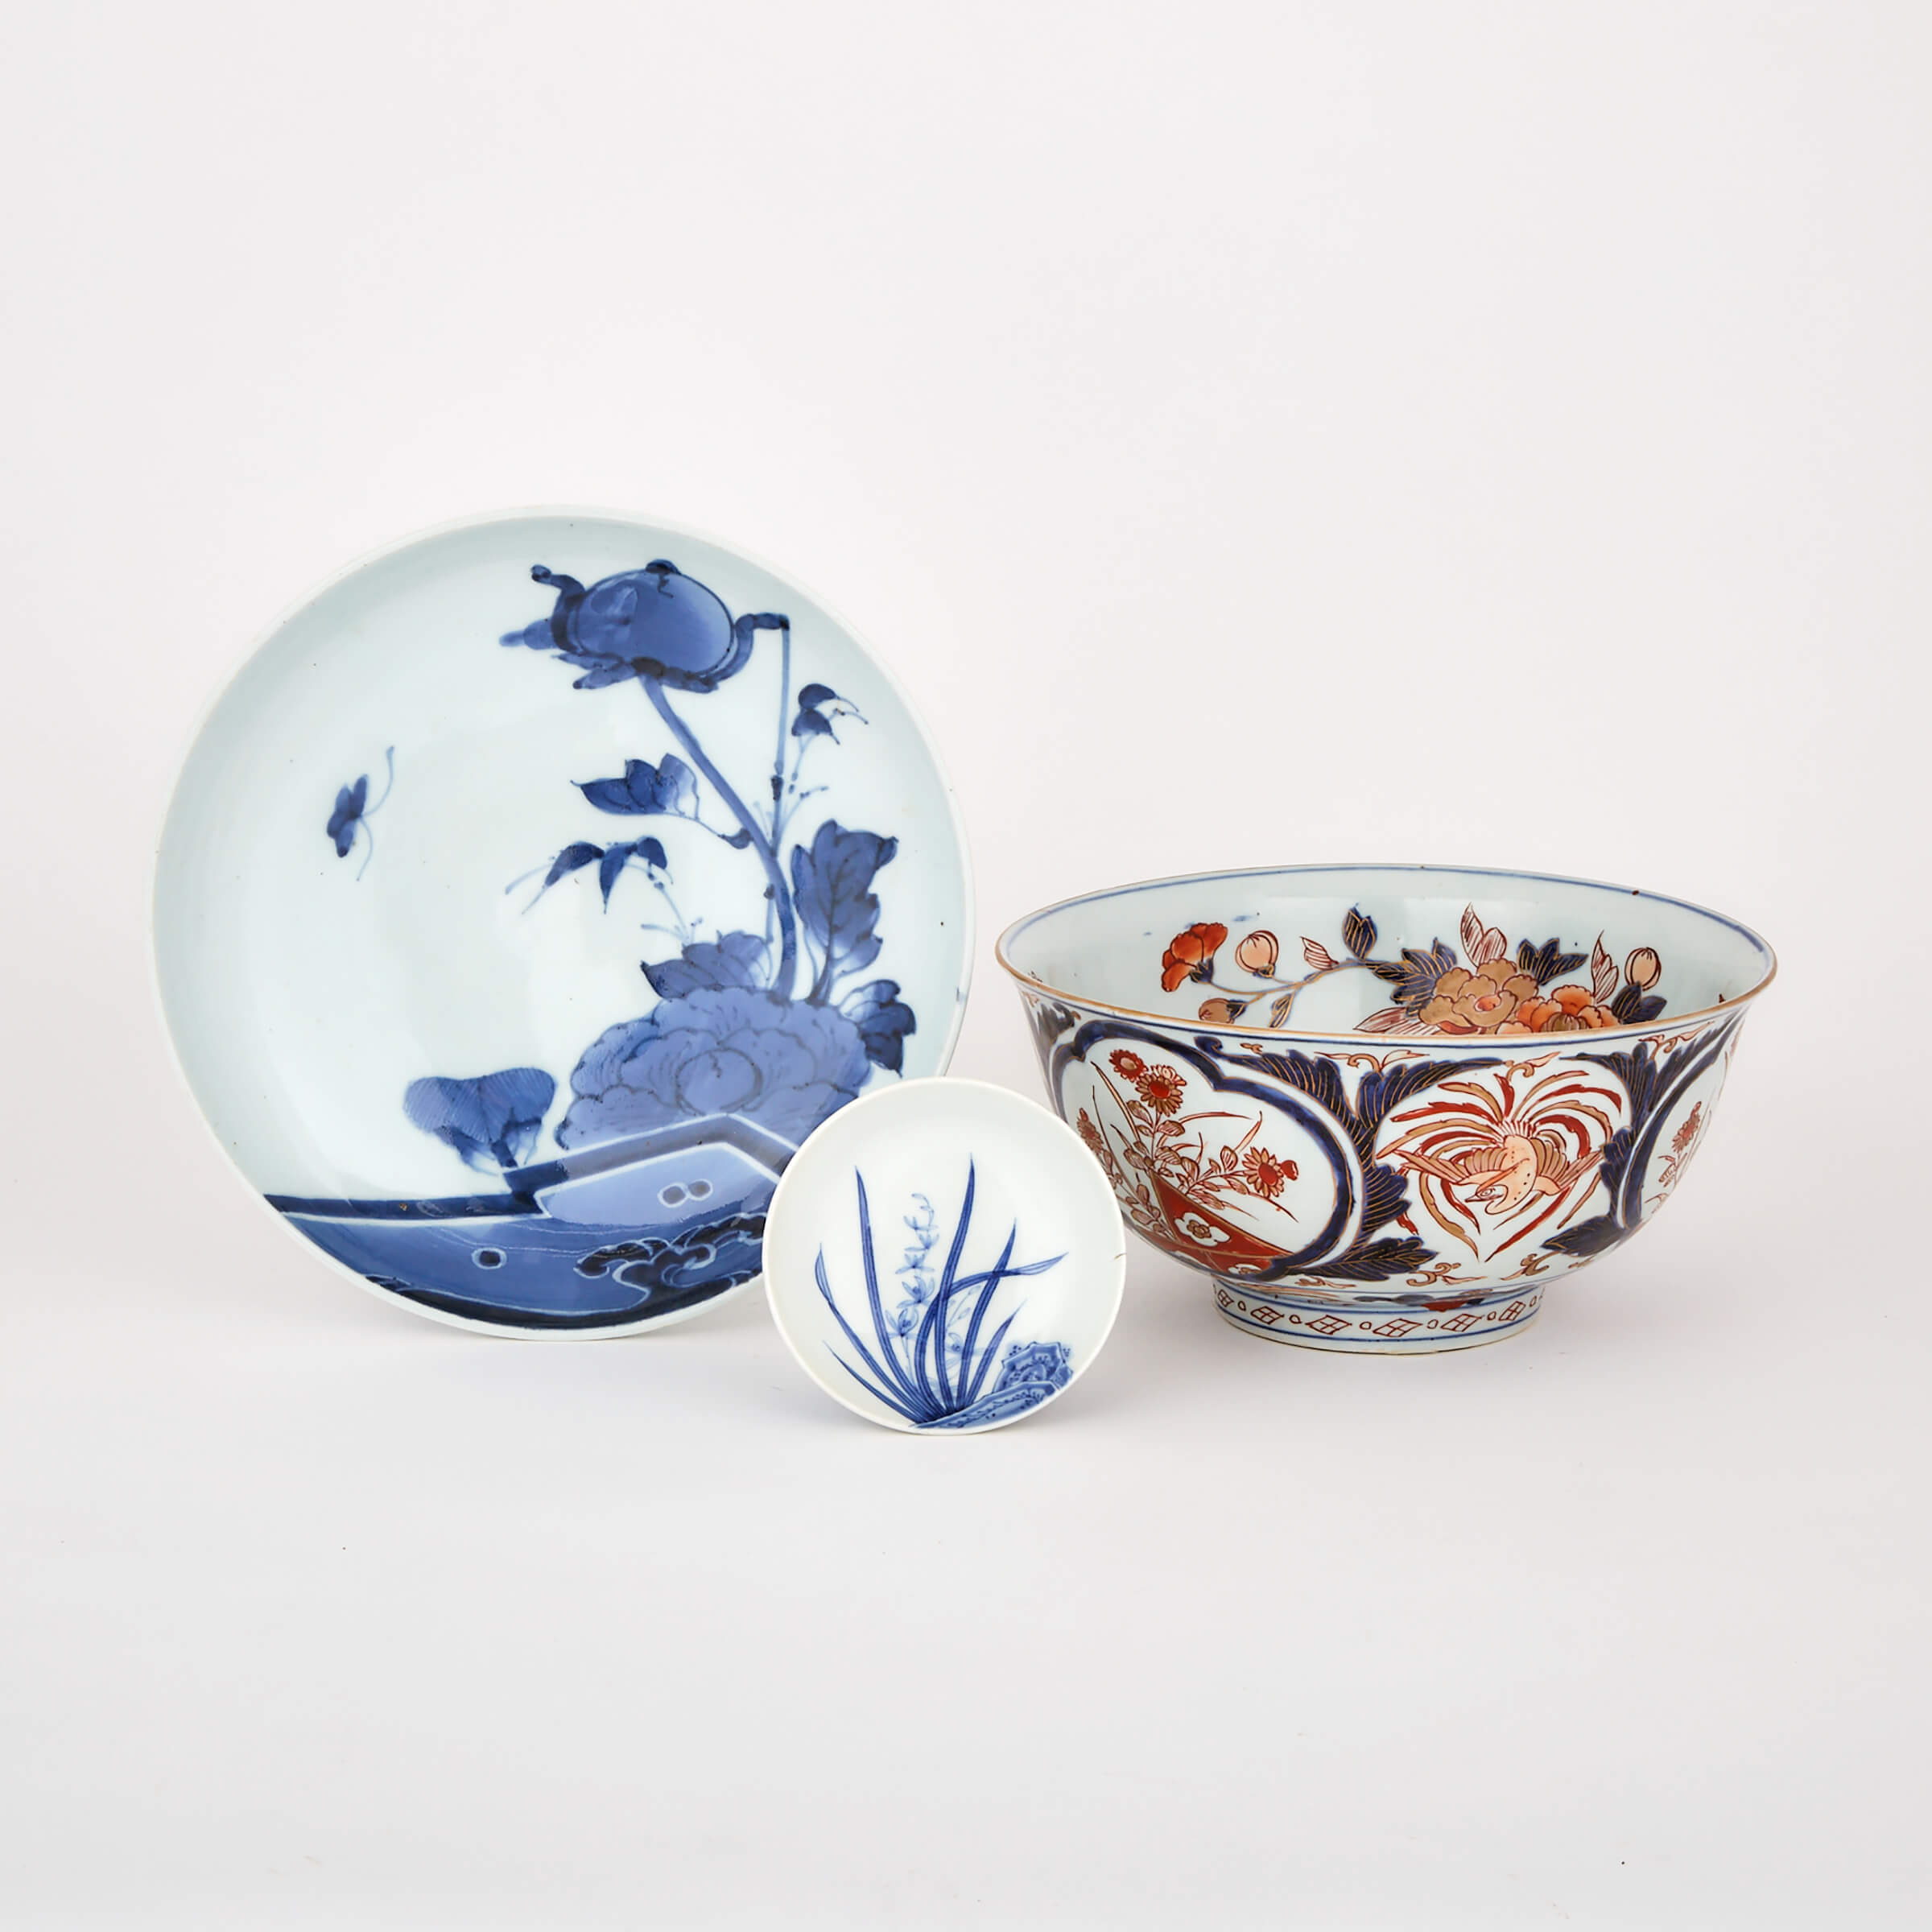 A Group of Three Japanese Porcelain Wares, 19th Century